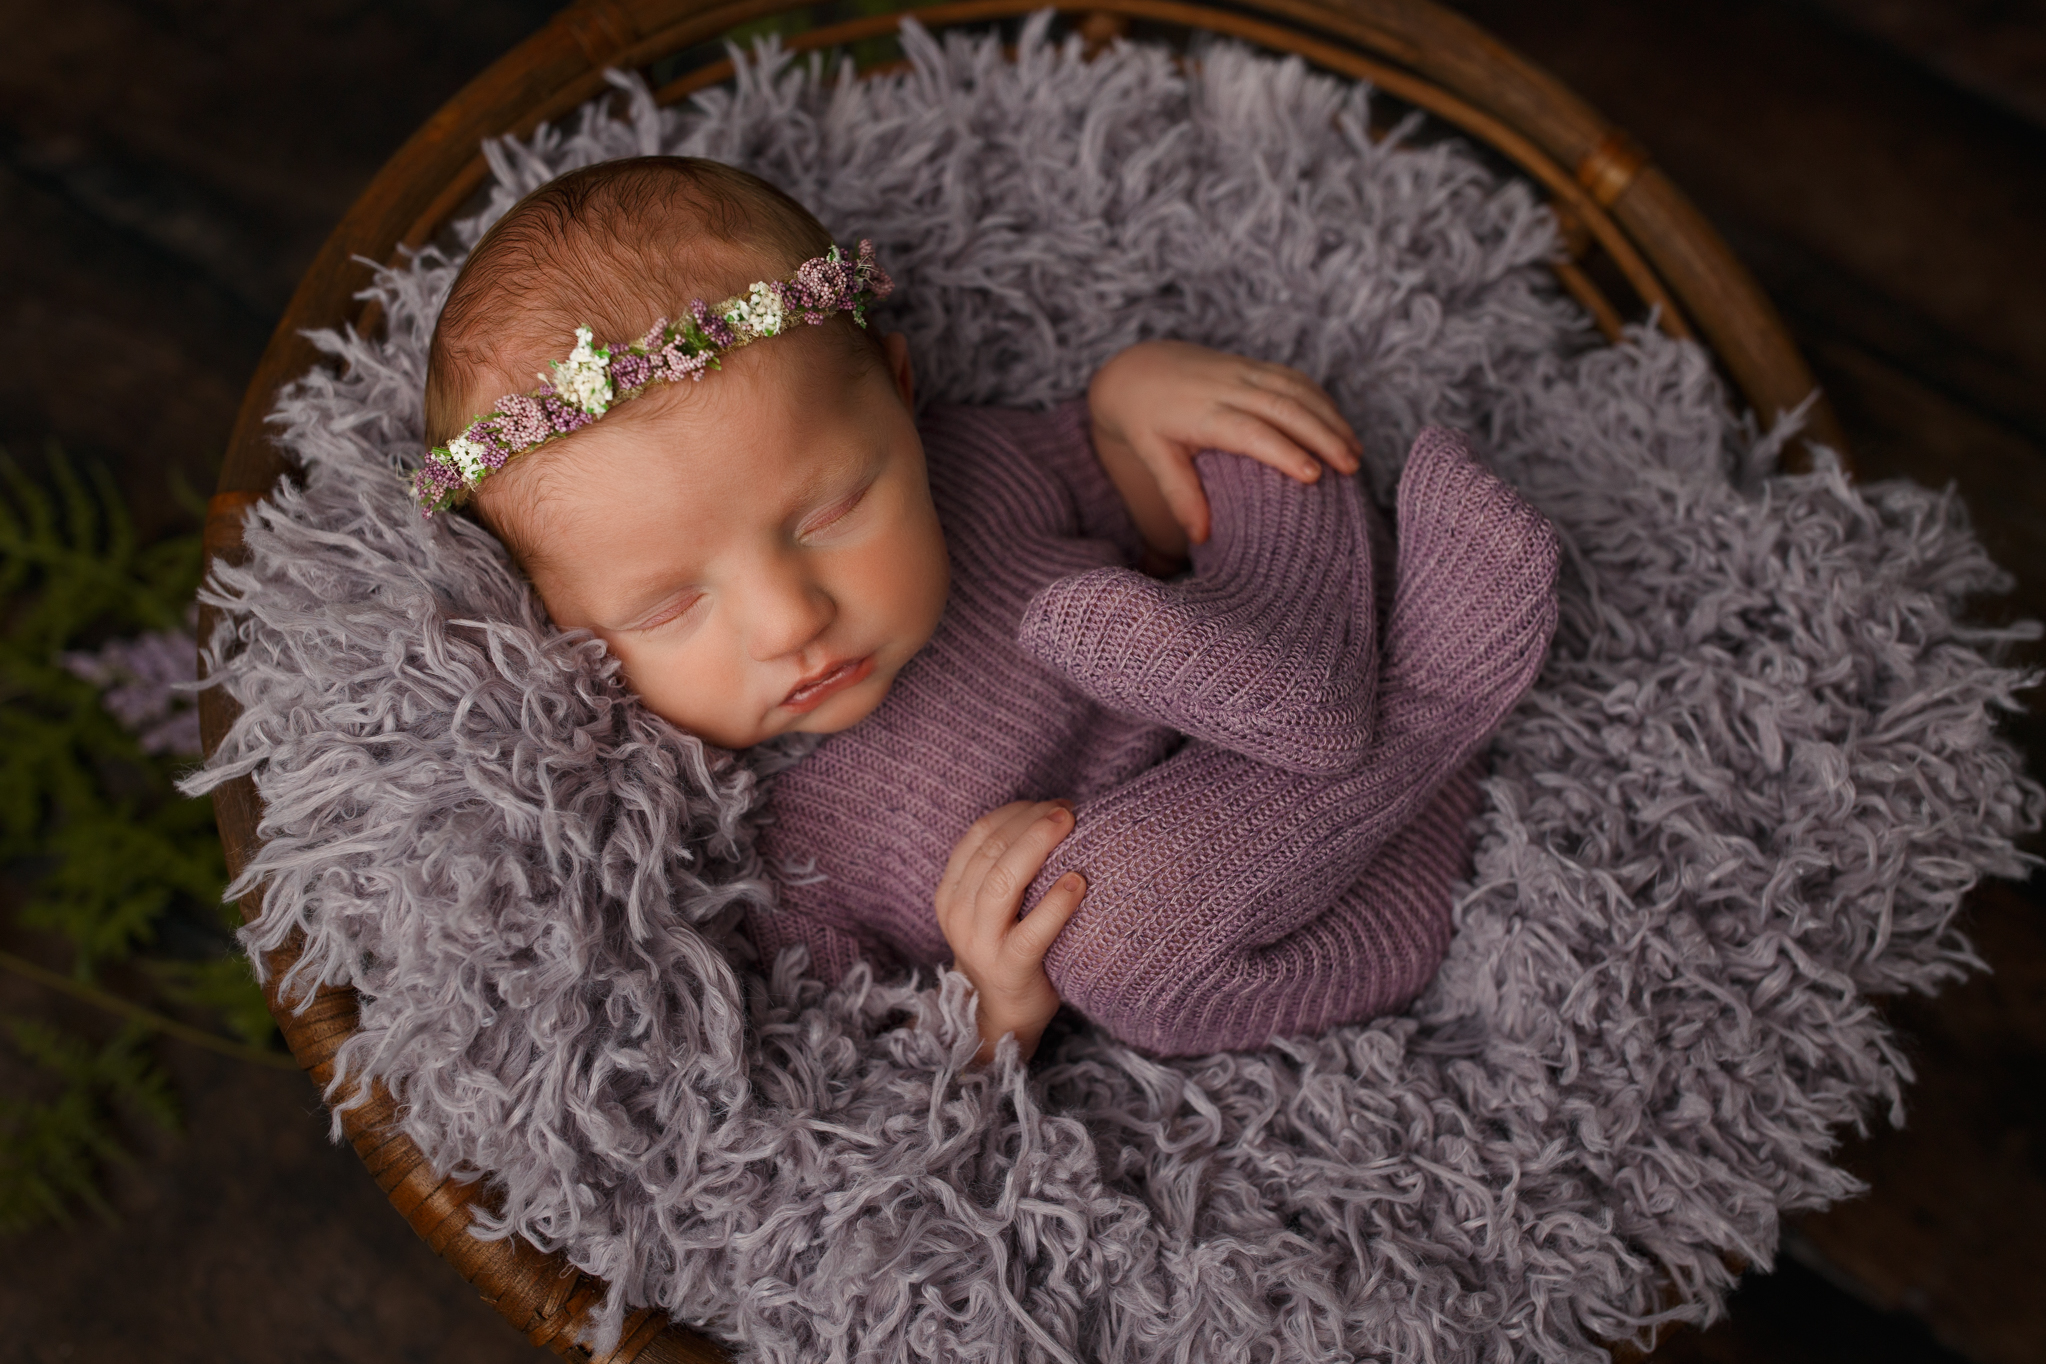 A baby girl in purple snuggled up in fur.